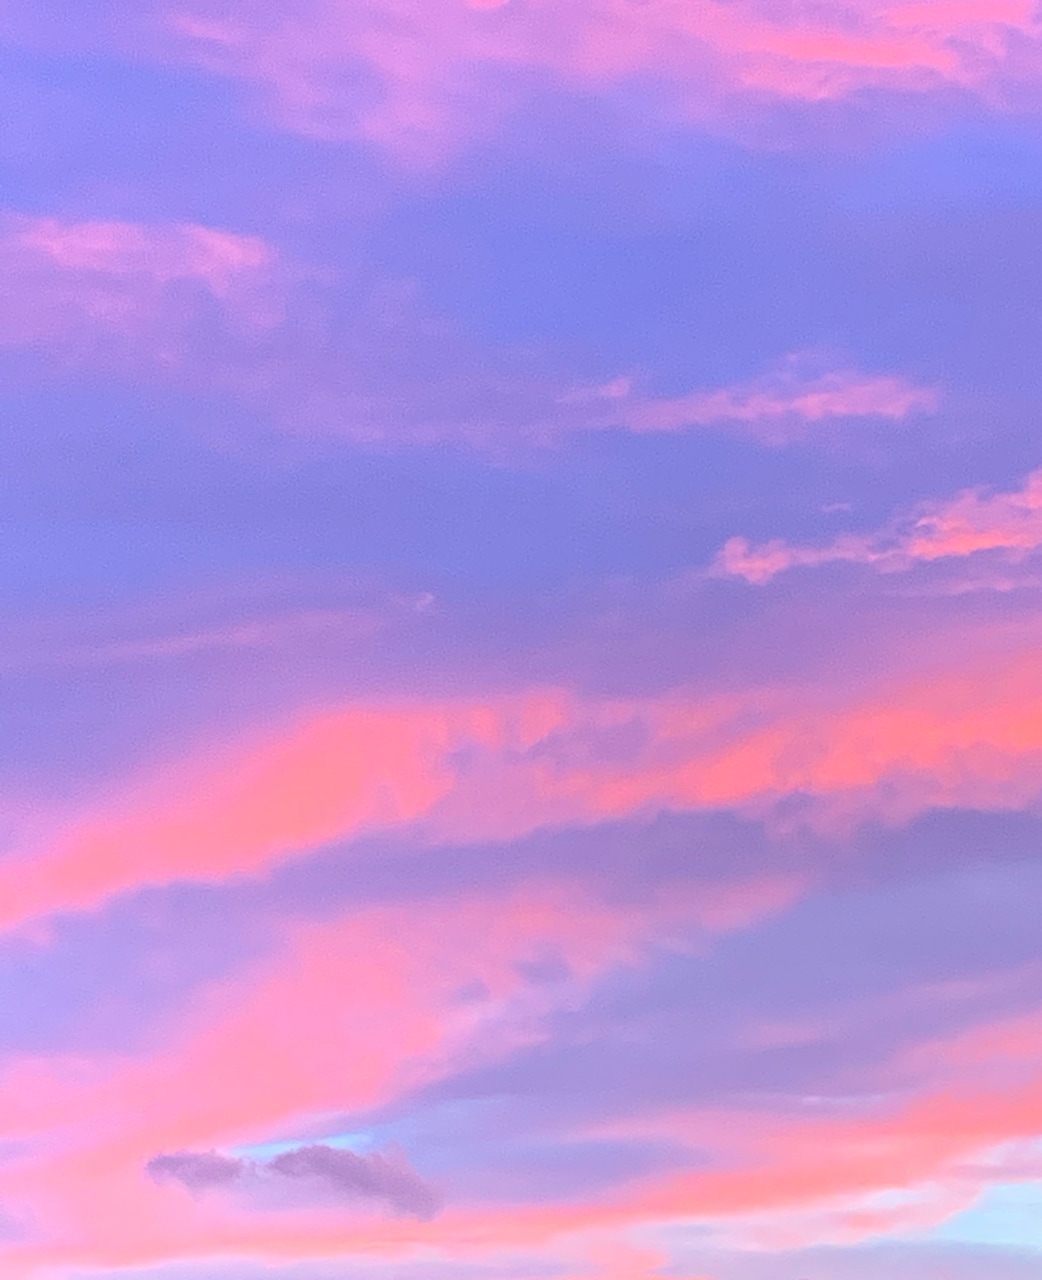 Aesthetic Clouds Iphone 6S Wallpapers